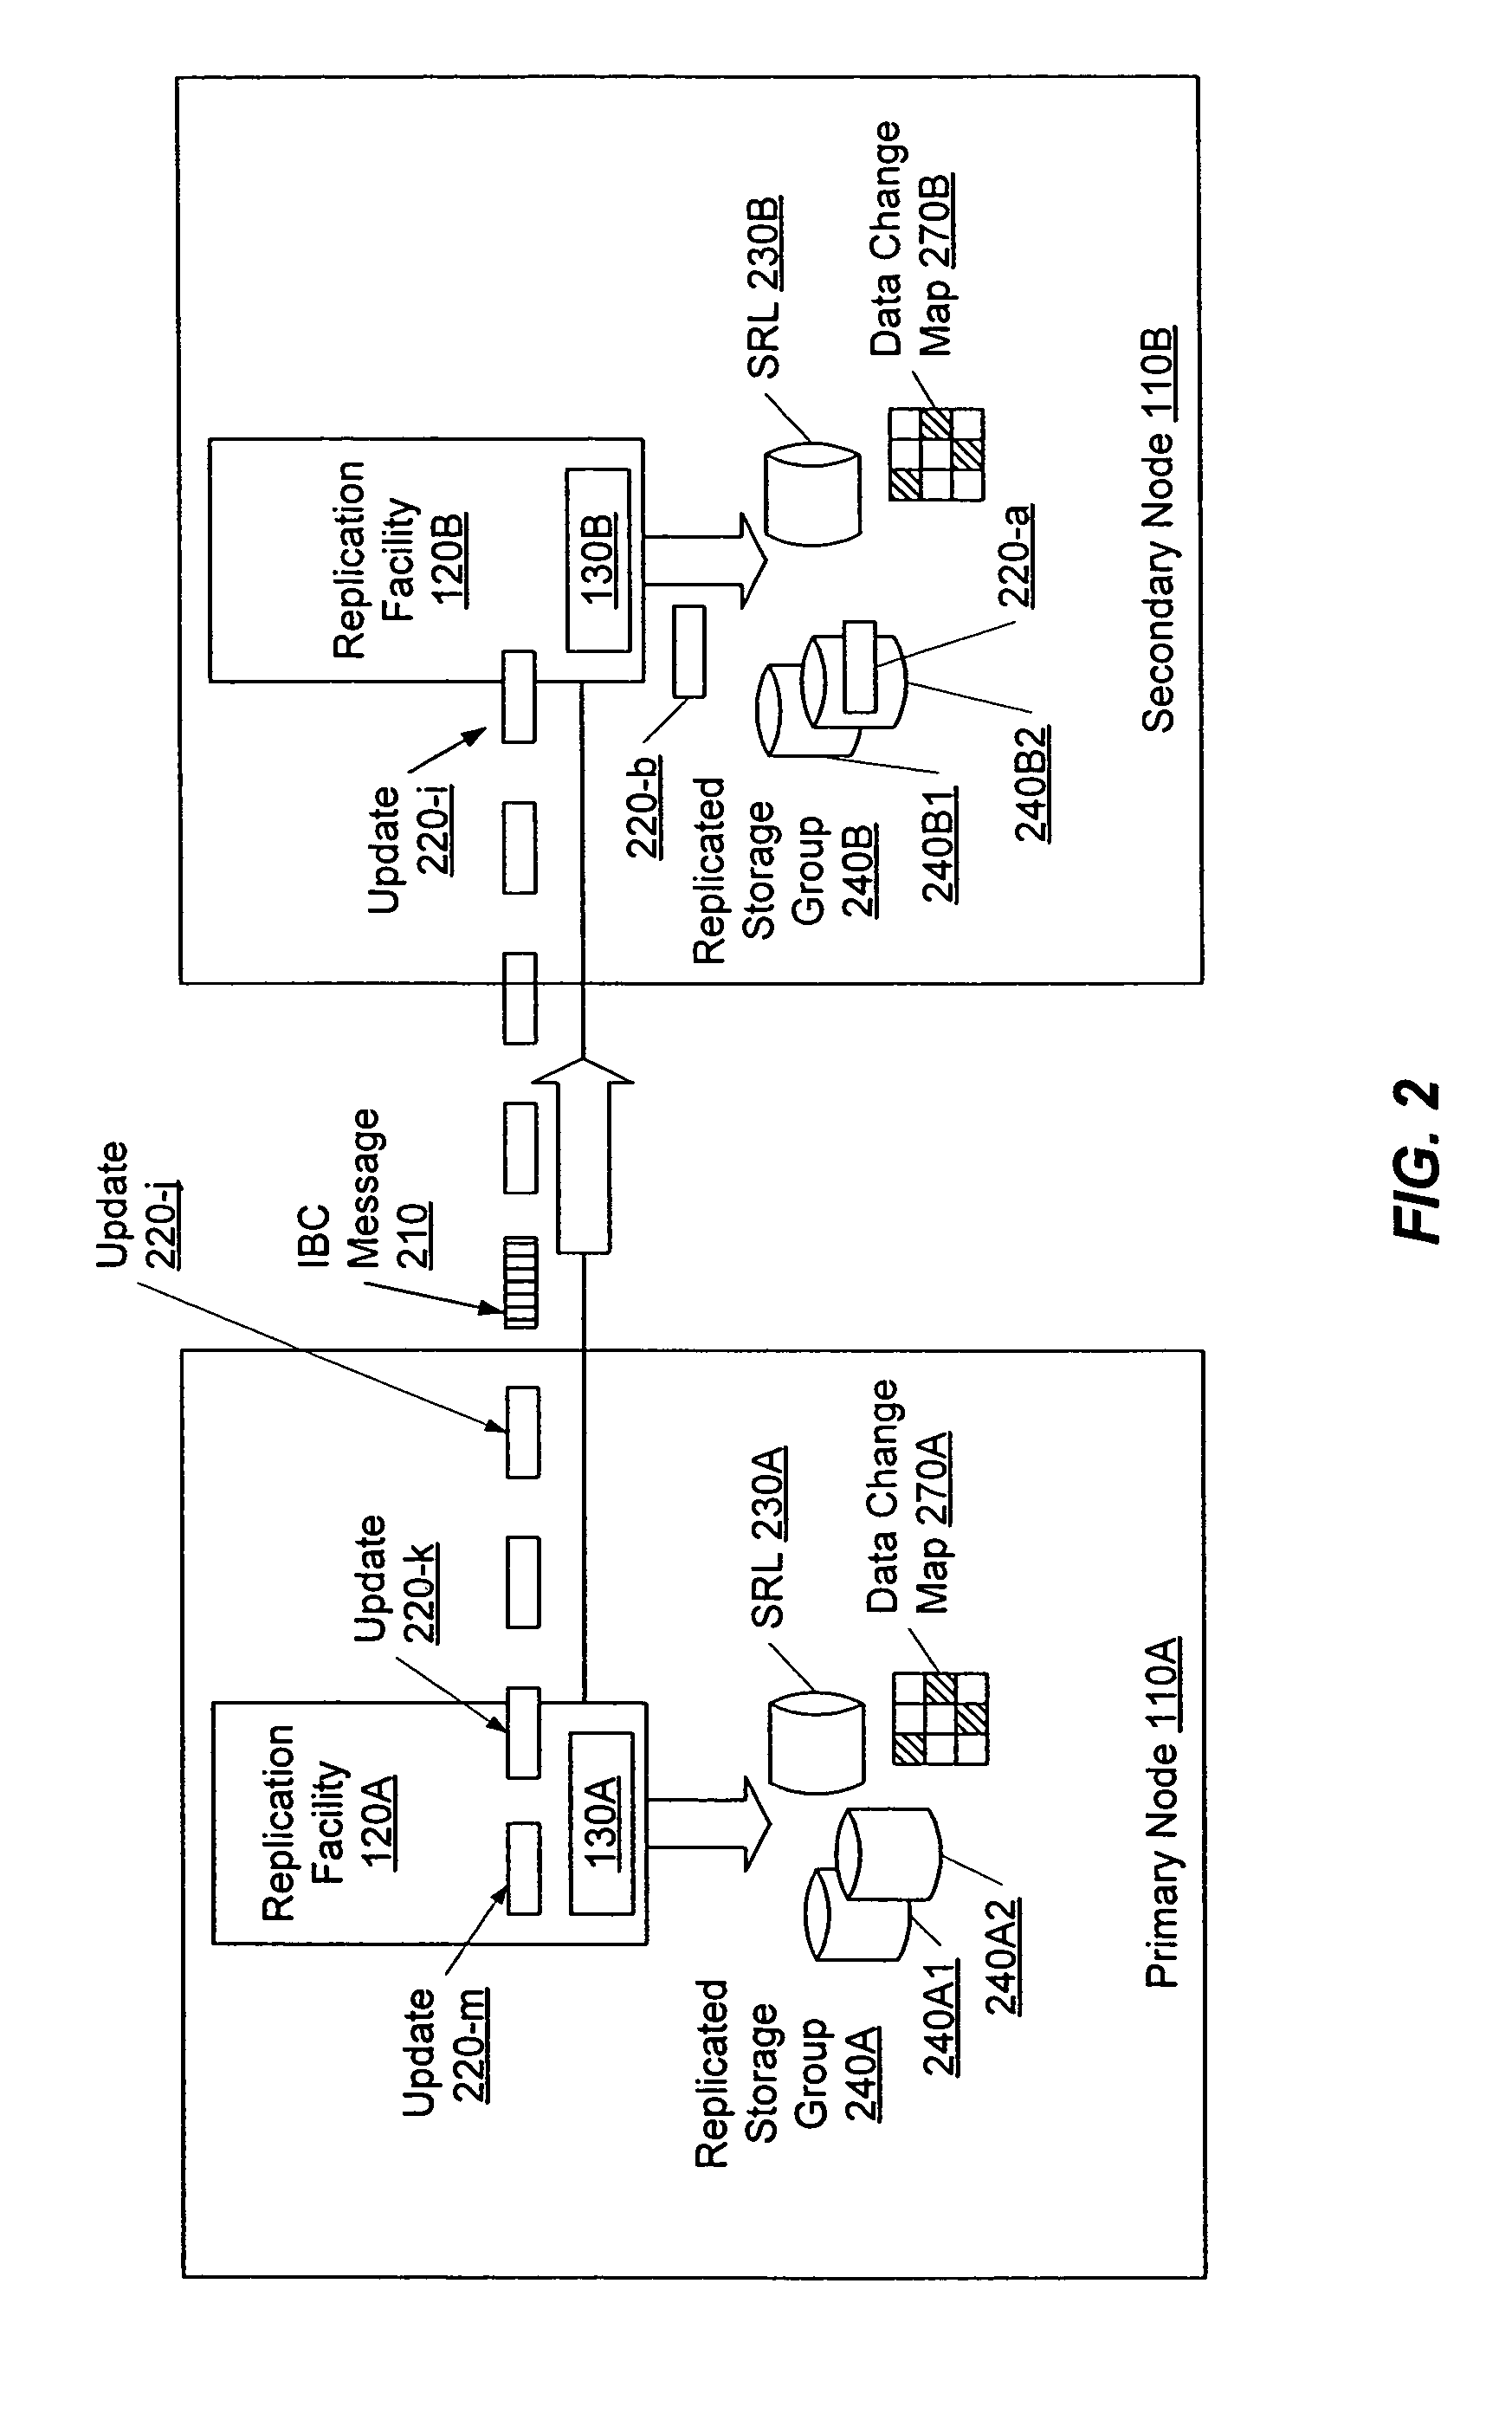 Control facility for processing in-band control messages during data replication